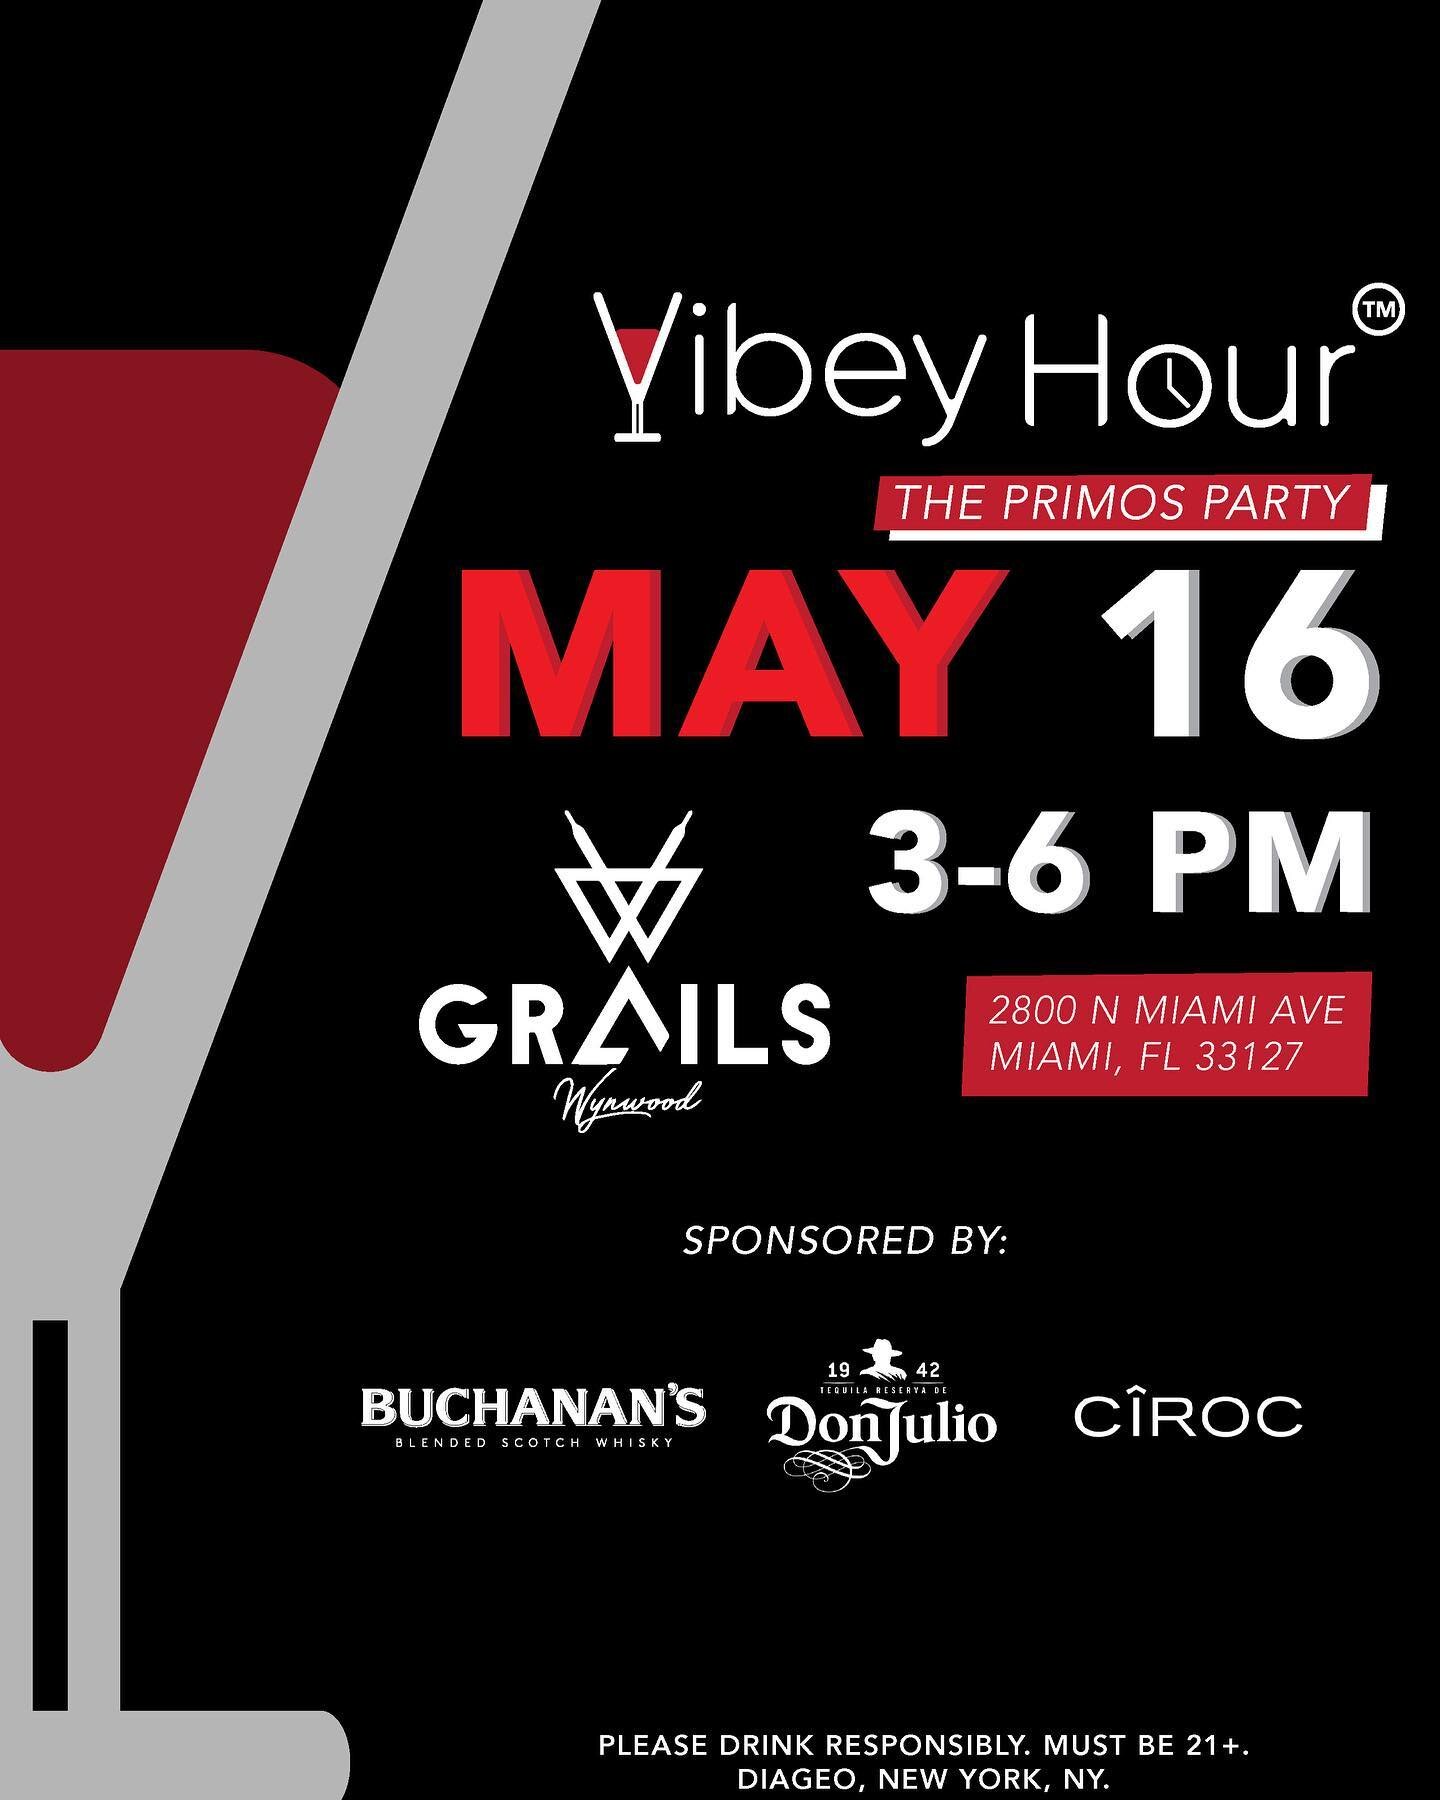 Miami! The next Vibey Hour&trade;️ is this week! May 16th @grailsmiami 

🔺
🔹
🔺
🔹 
🔺
Vibey Hour&trade;️ : The Primos Party 
Invite tus Primos! #NosotrosLaGente #TodosJuntos
🔹
🔺 
🔹
🔺

Featured cocktails by: @buchananswhisky @donjuliotequila @c